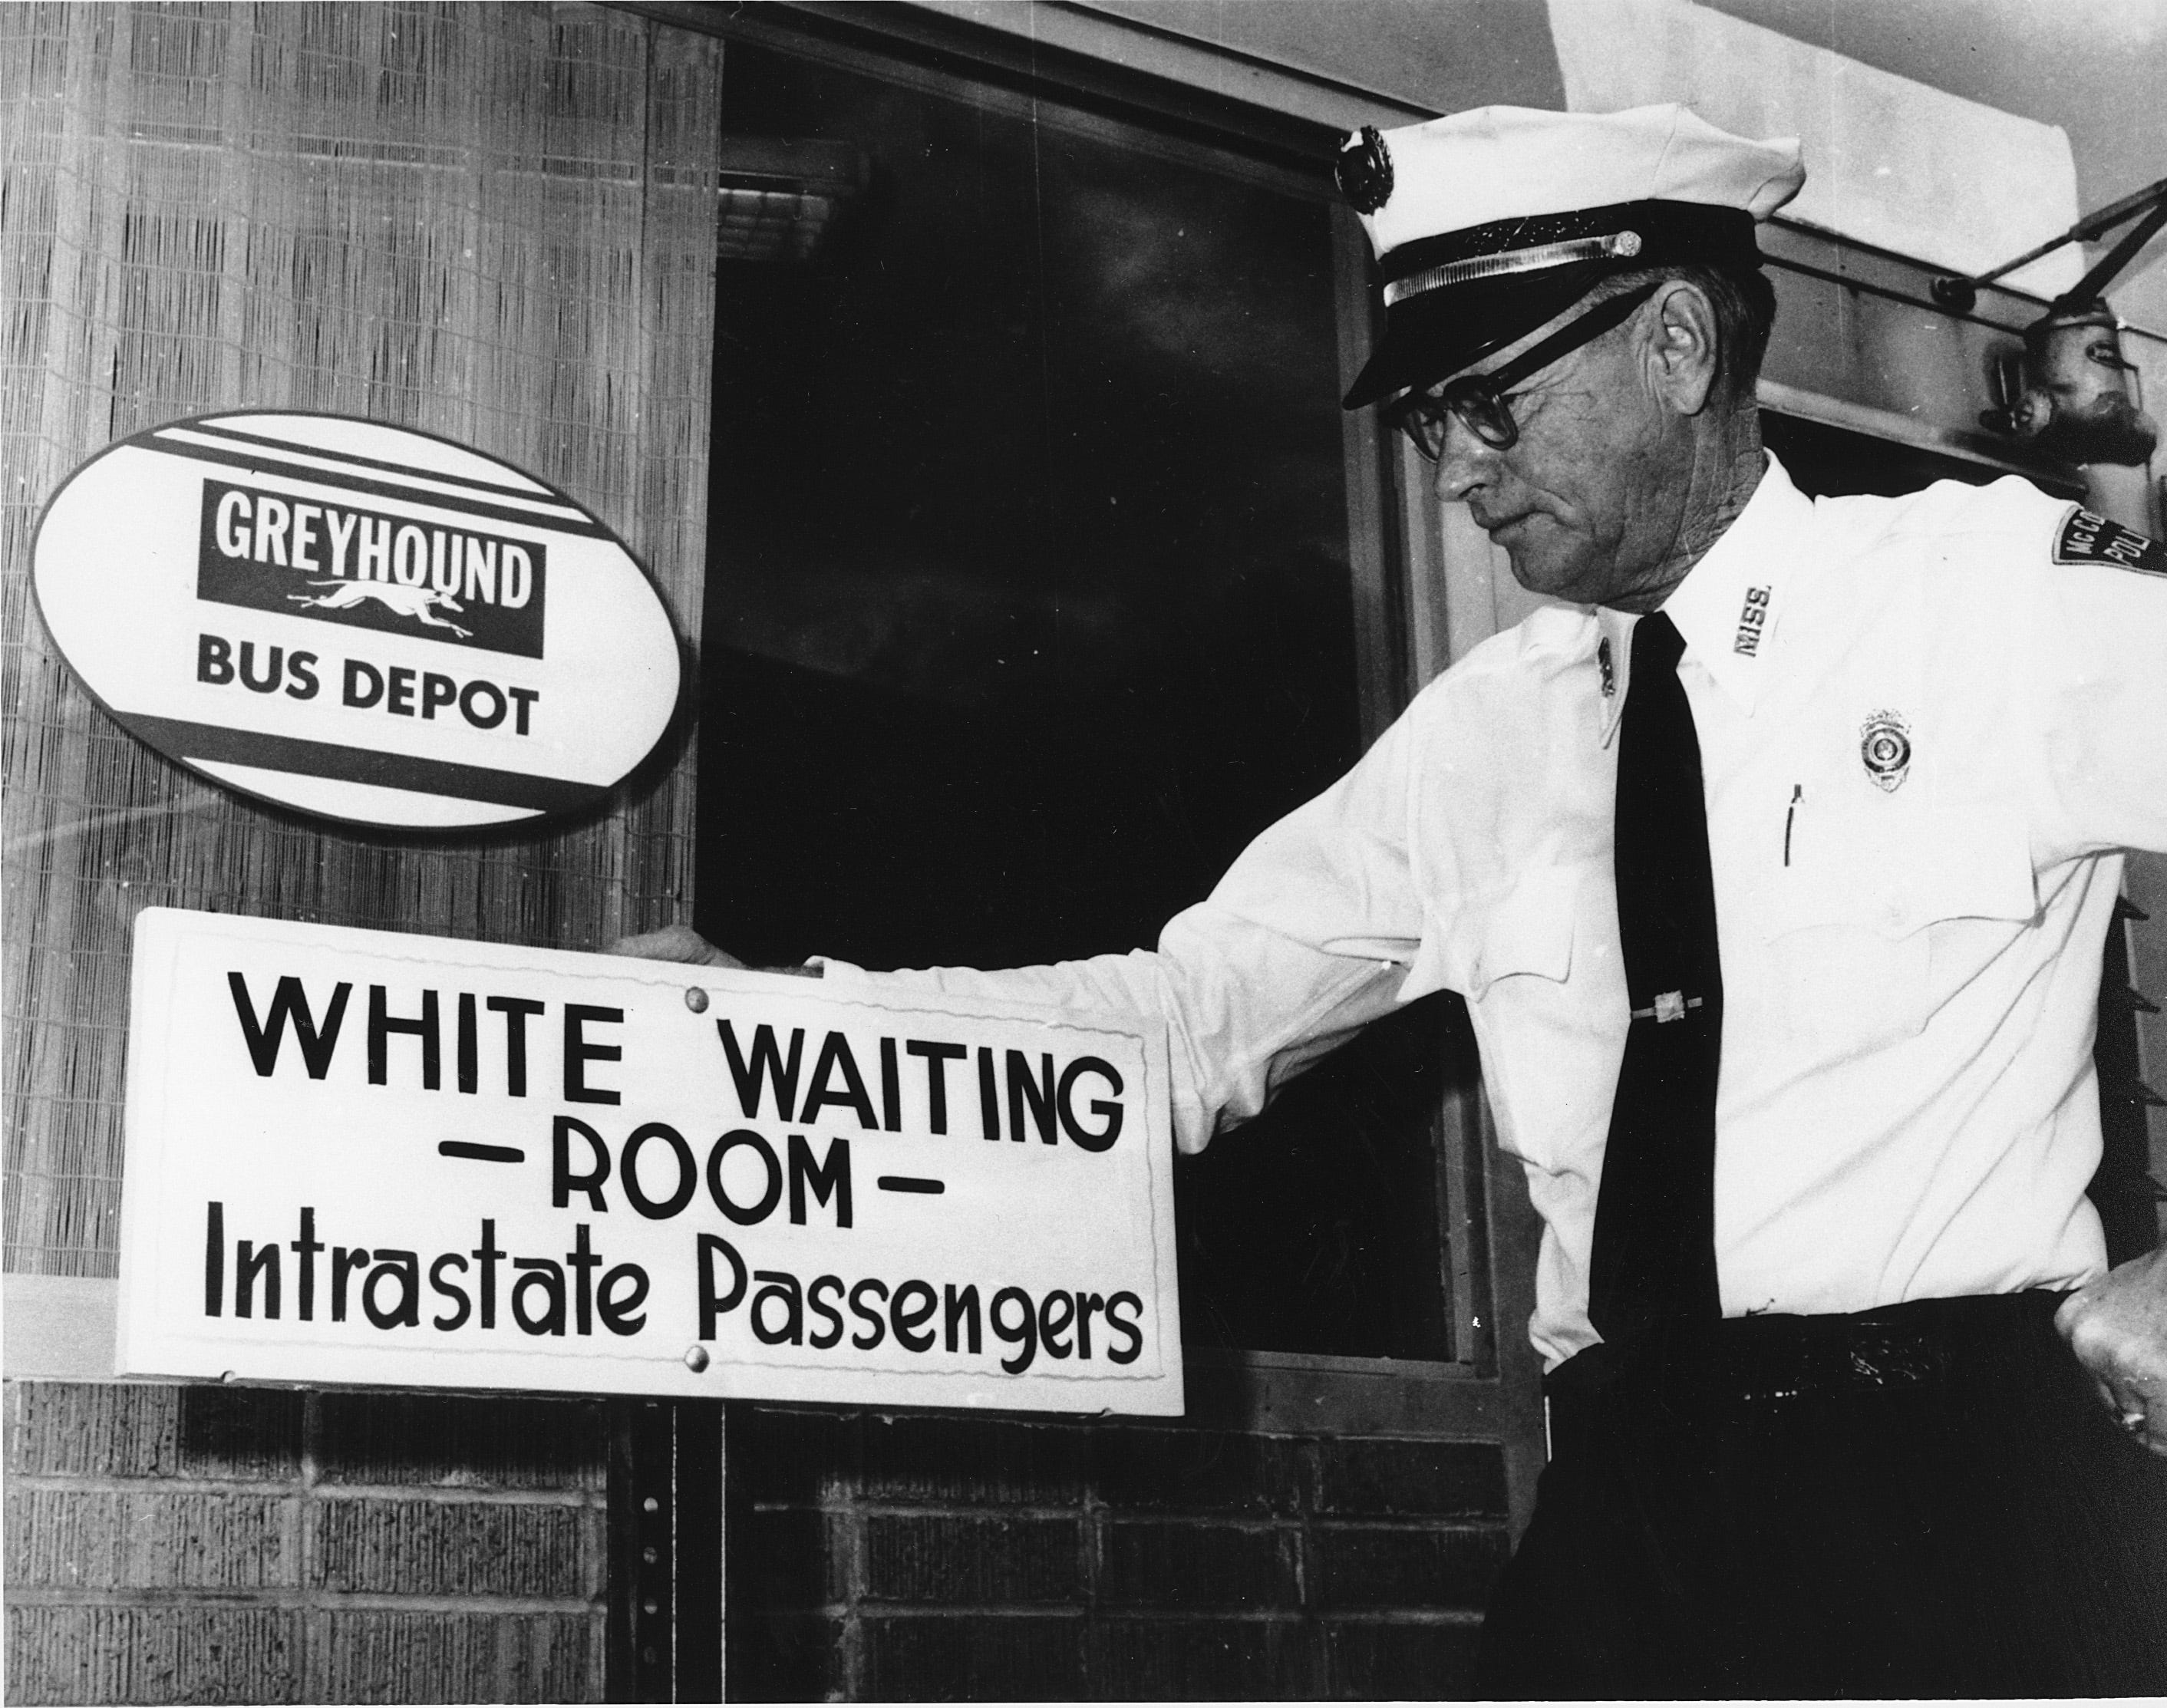 Police Chief George H. Guy poses beside the "White waiting room" sign posted outside the Greyhound bus terminal in McComb, Miss., on Nov. 2, 1961.